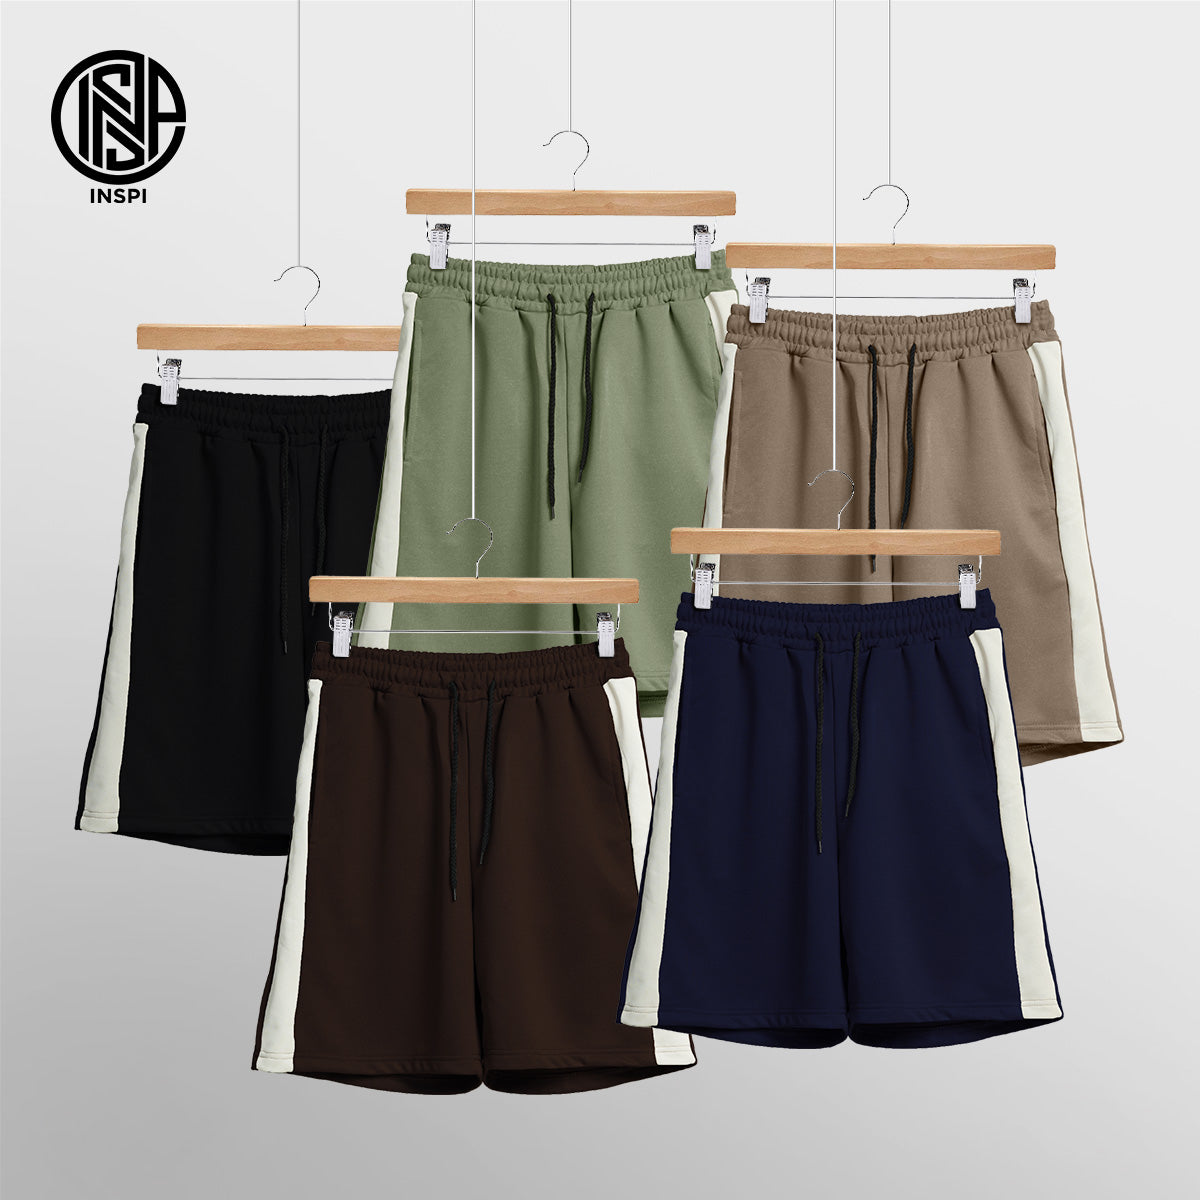 INSPI Walking Shorts with Drawstring and Pockets for Men and Women.